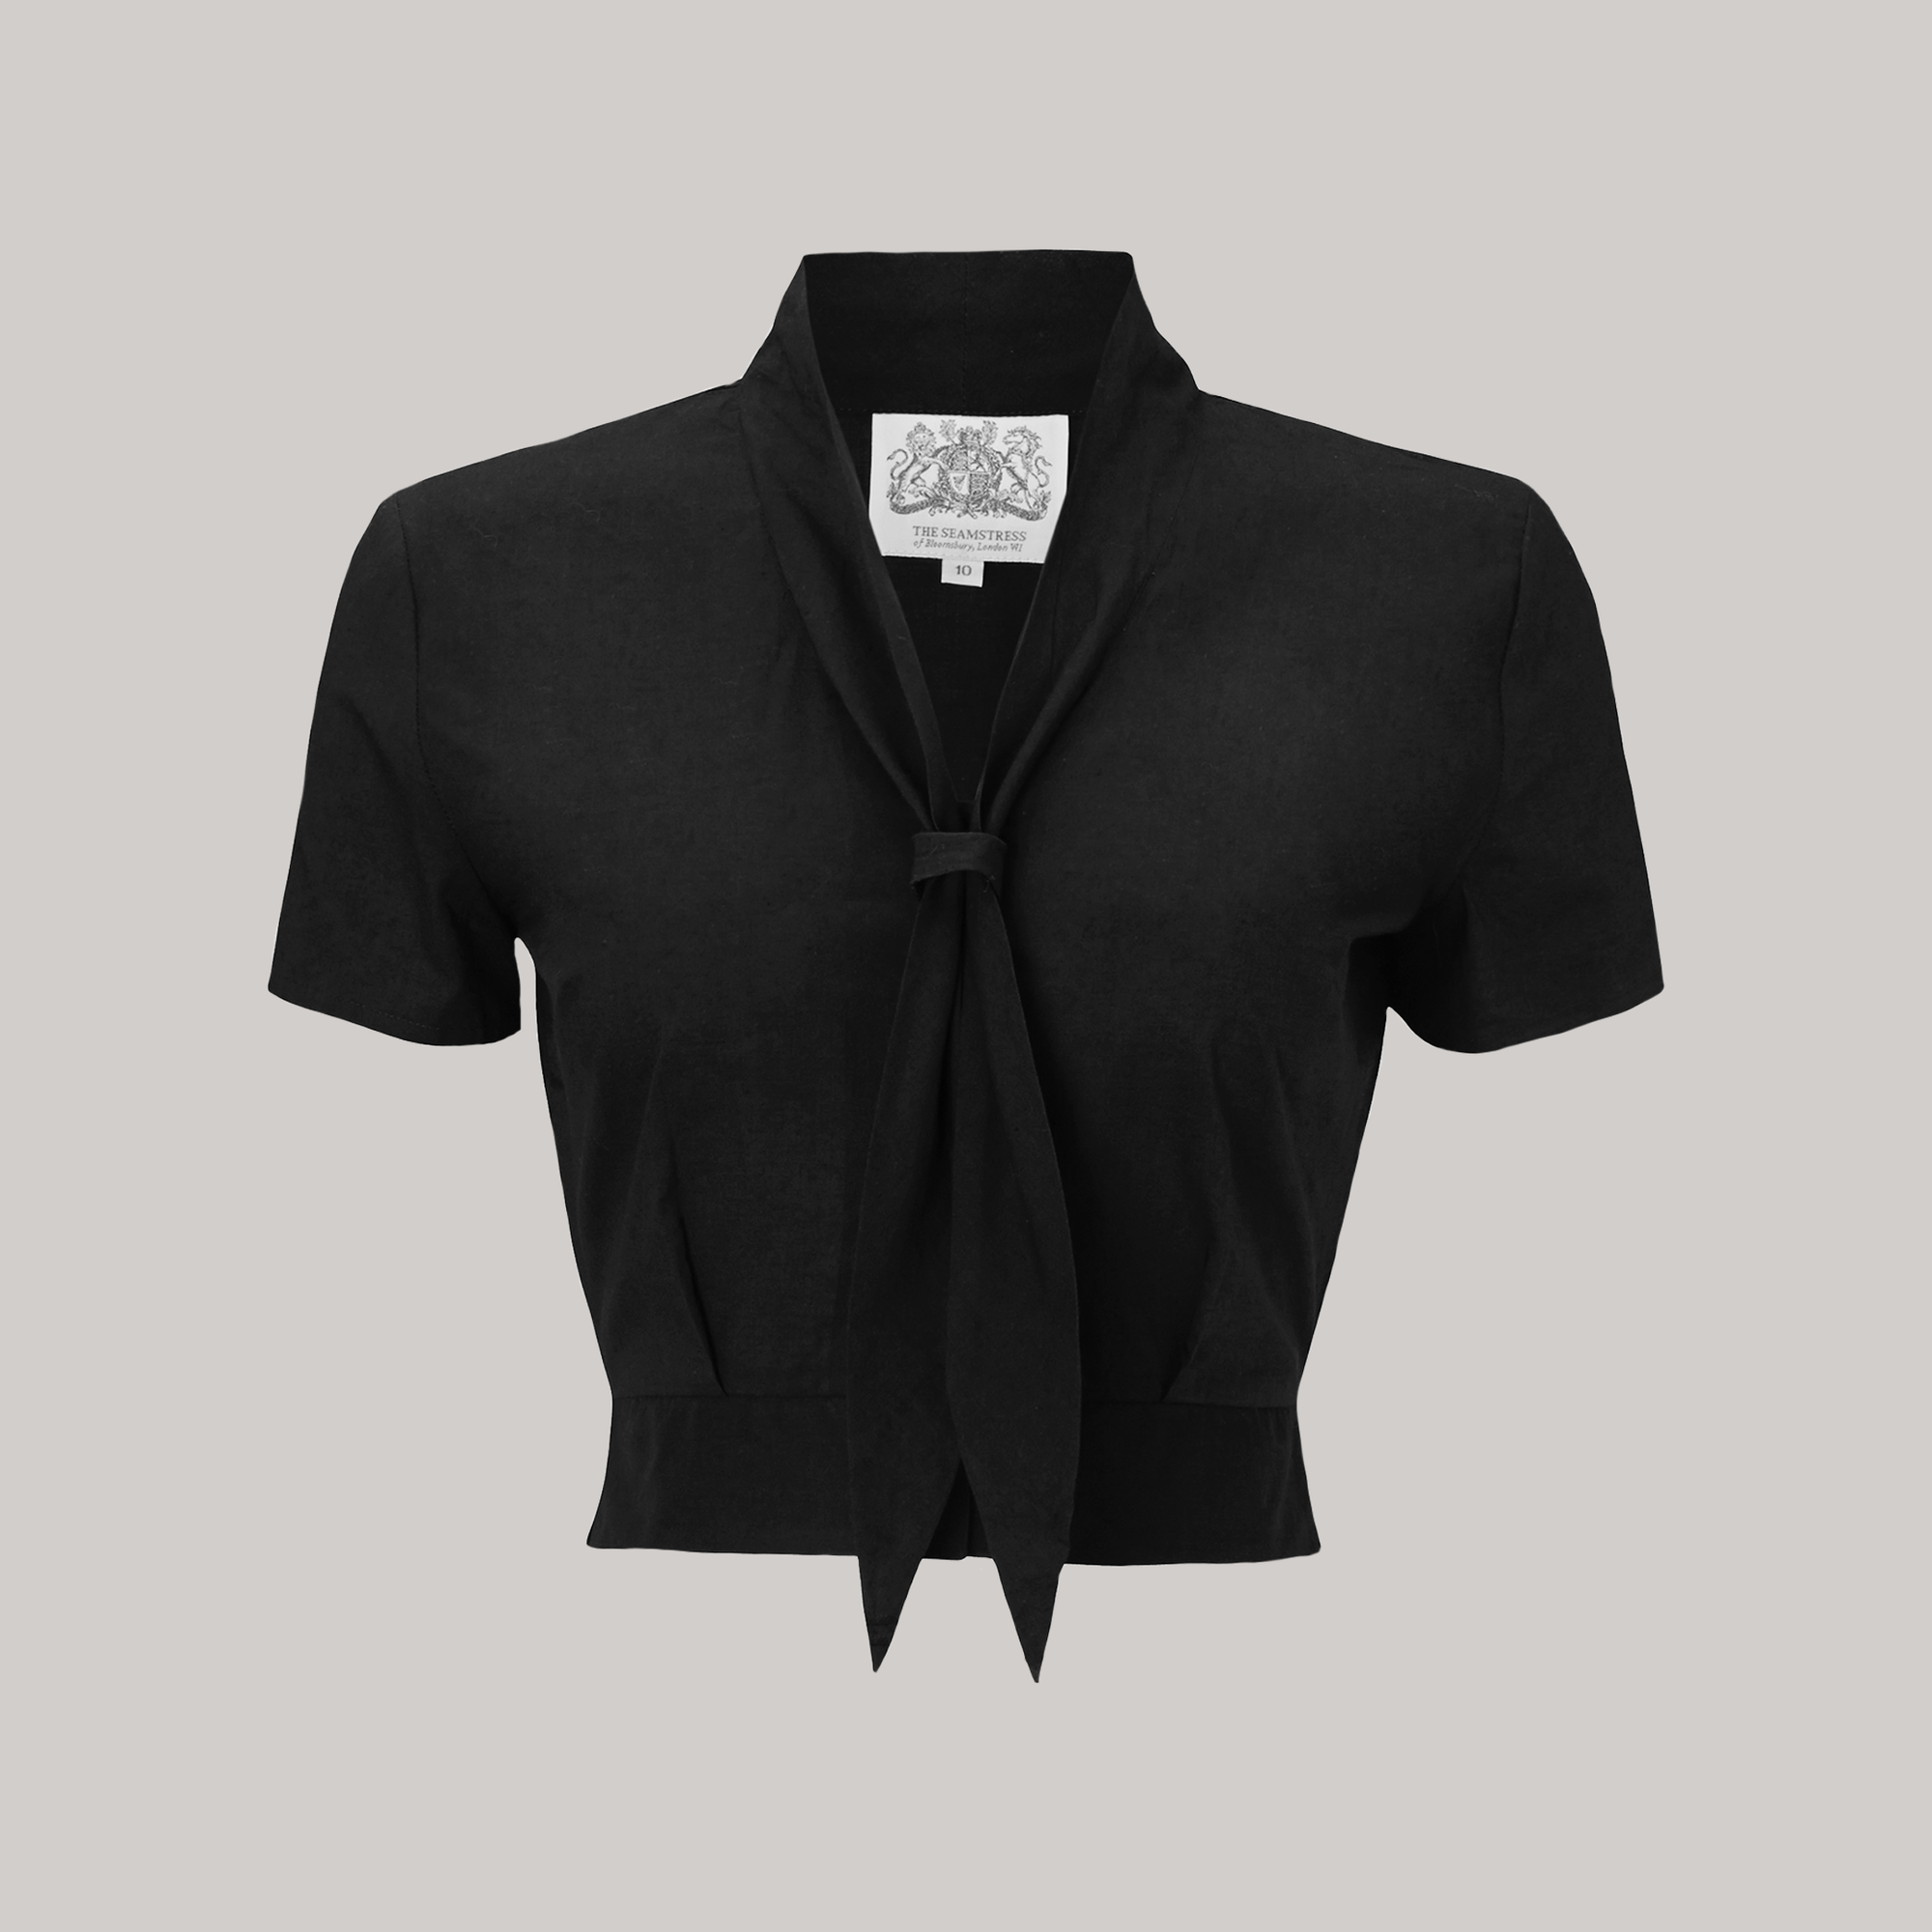 A 1940s sailor style blouse with short sleeves in black. Featuring a roll style collar to give the iconic sailor look. Small buttons run down the front of the blouse for fastening but are hidden by the long collar.